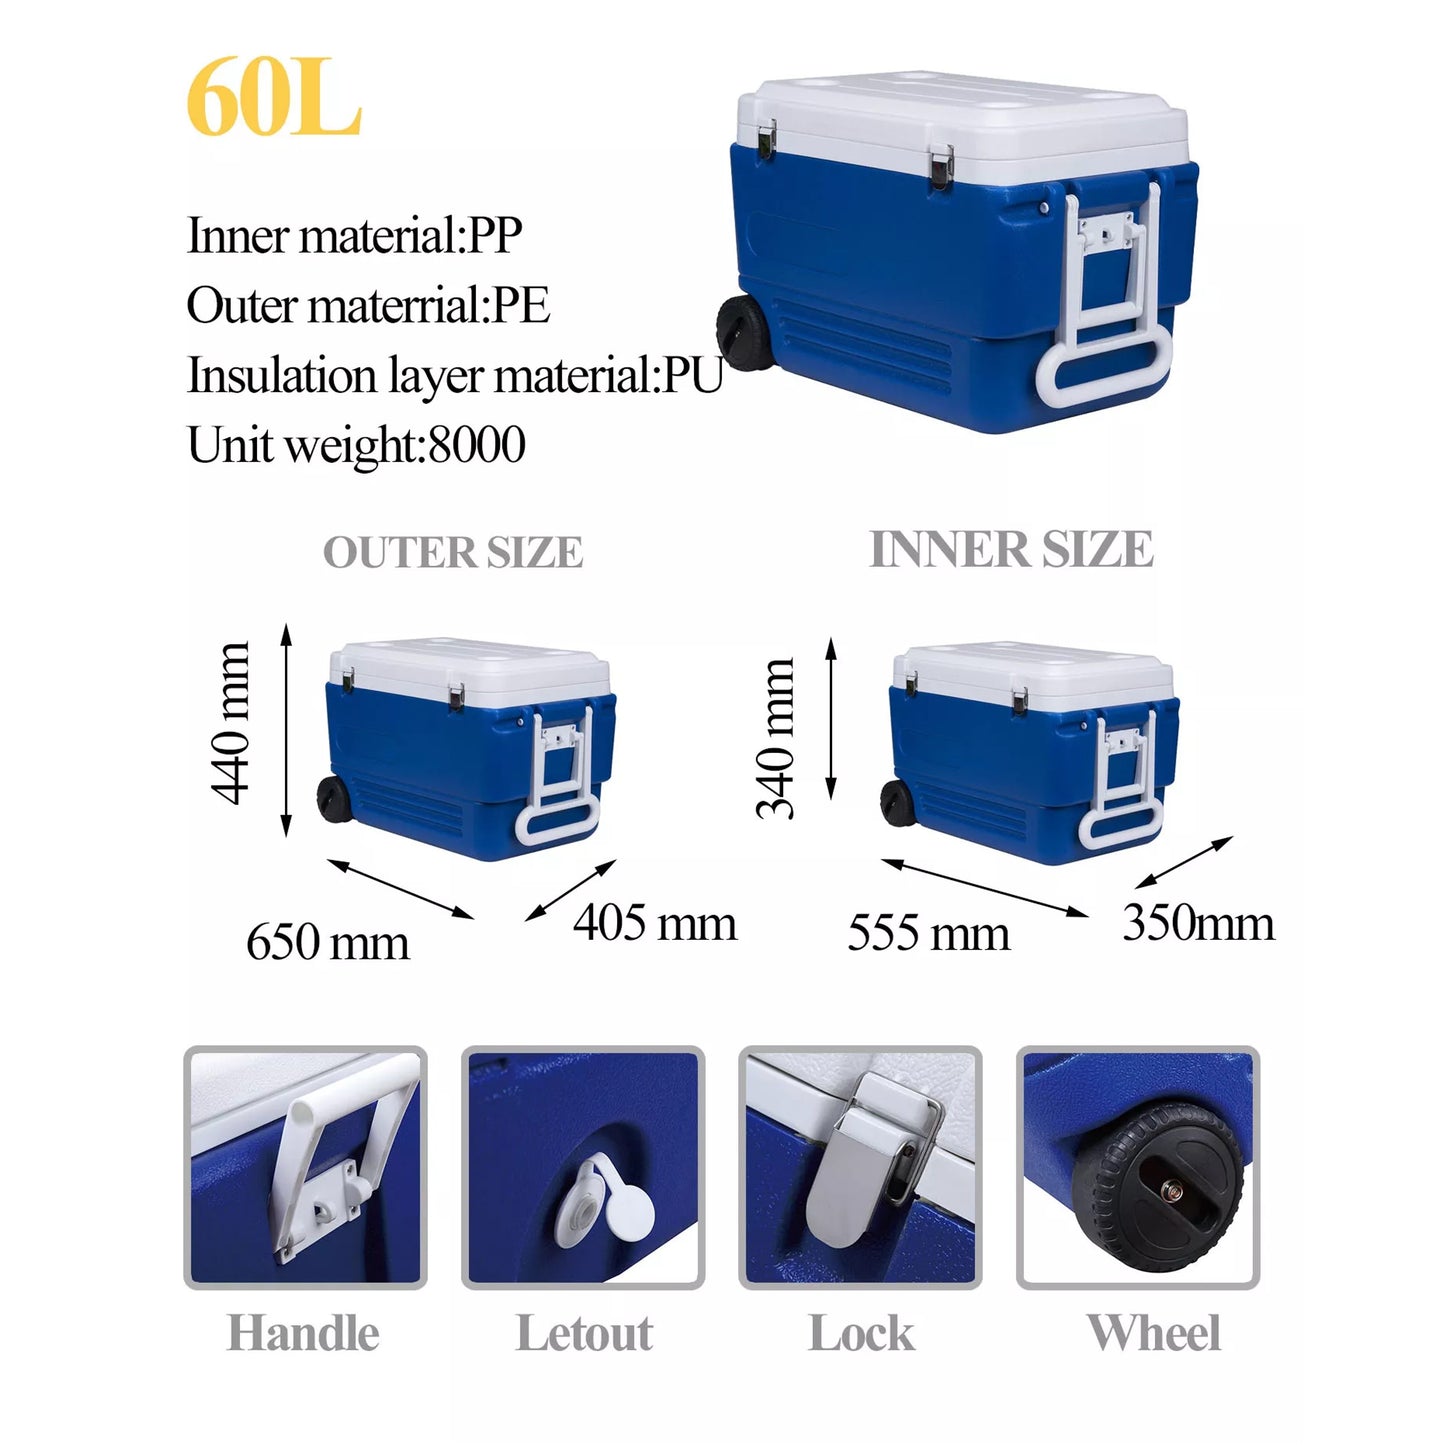 Rectangle Cooler box with wheels CB-06